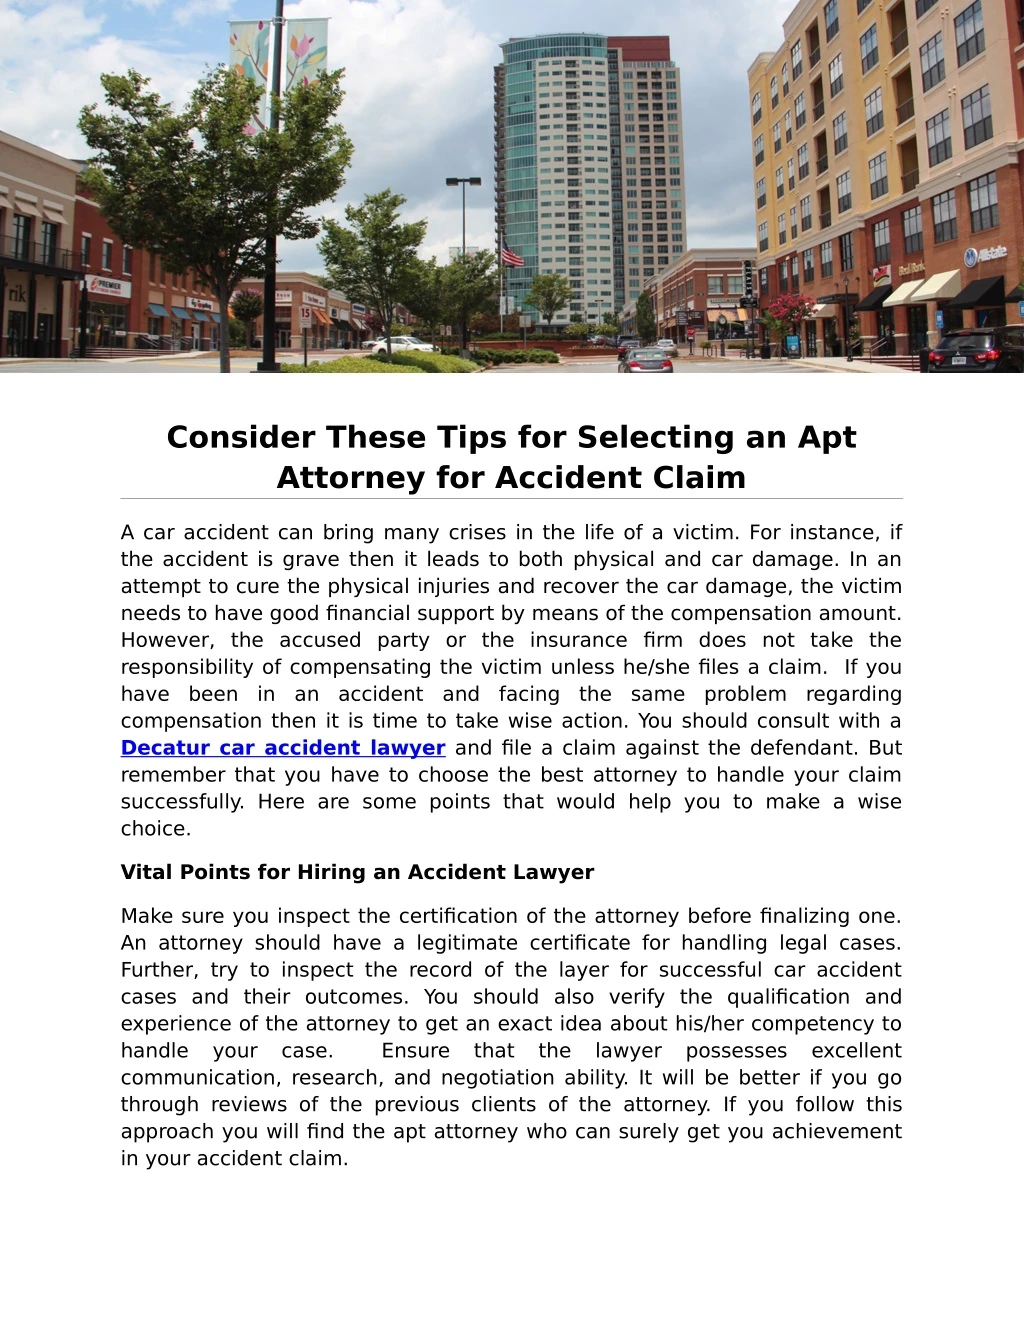 consider these tips for selecting an apt attorney